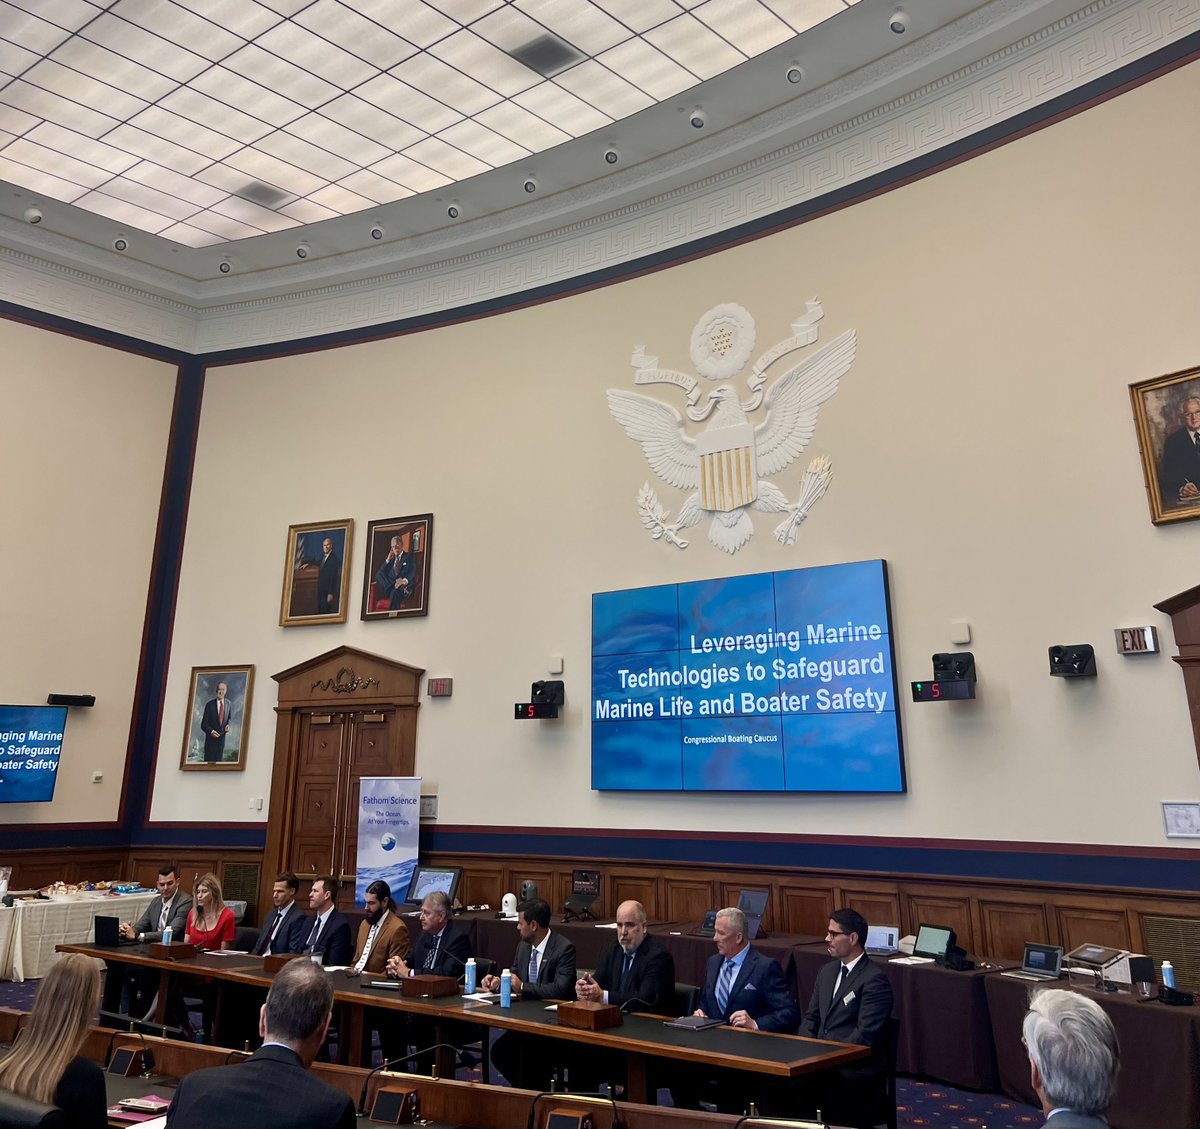 Happening Now: Congressional Boating Caucus hosts briefing 'Leveraging Marine Technologies to Safeguard Marine Life and Boater Safety'.
#OutdoorRecreation #Boating #MarineIndustry